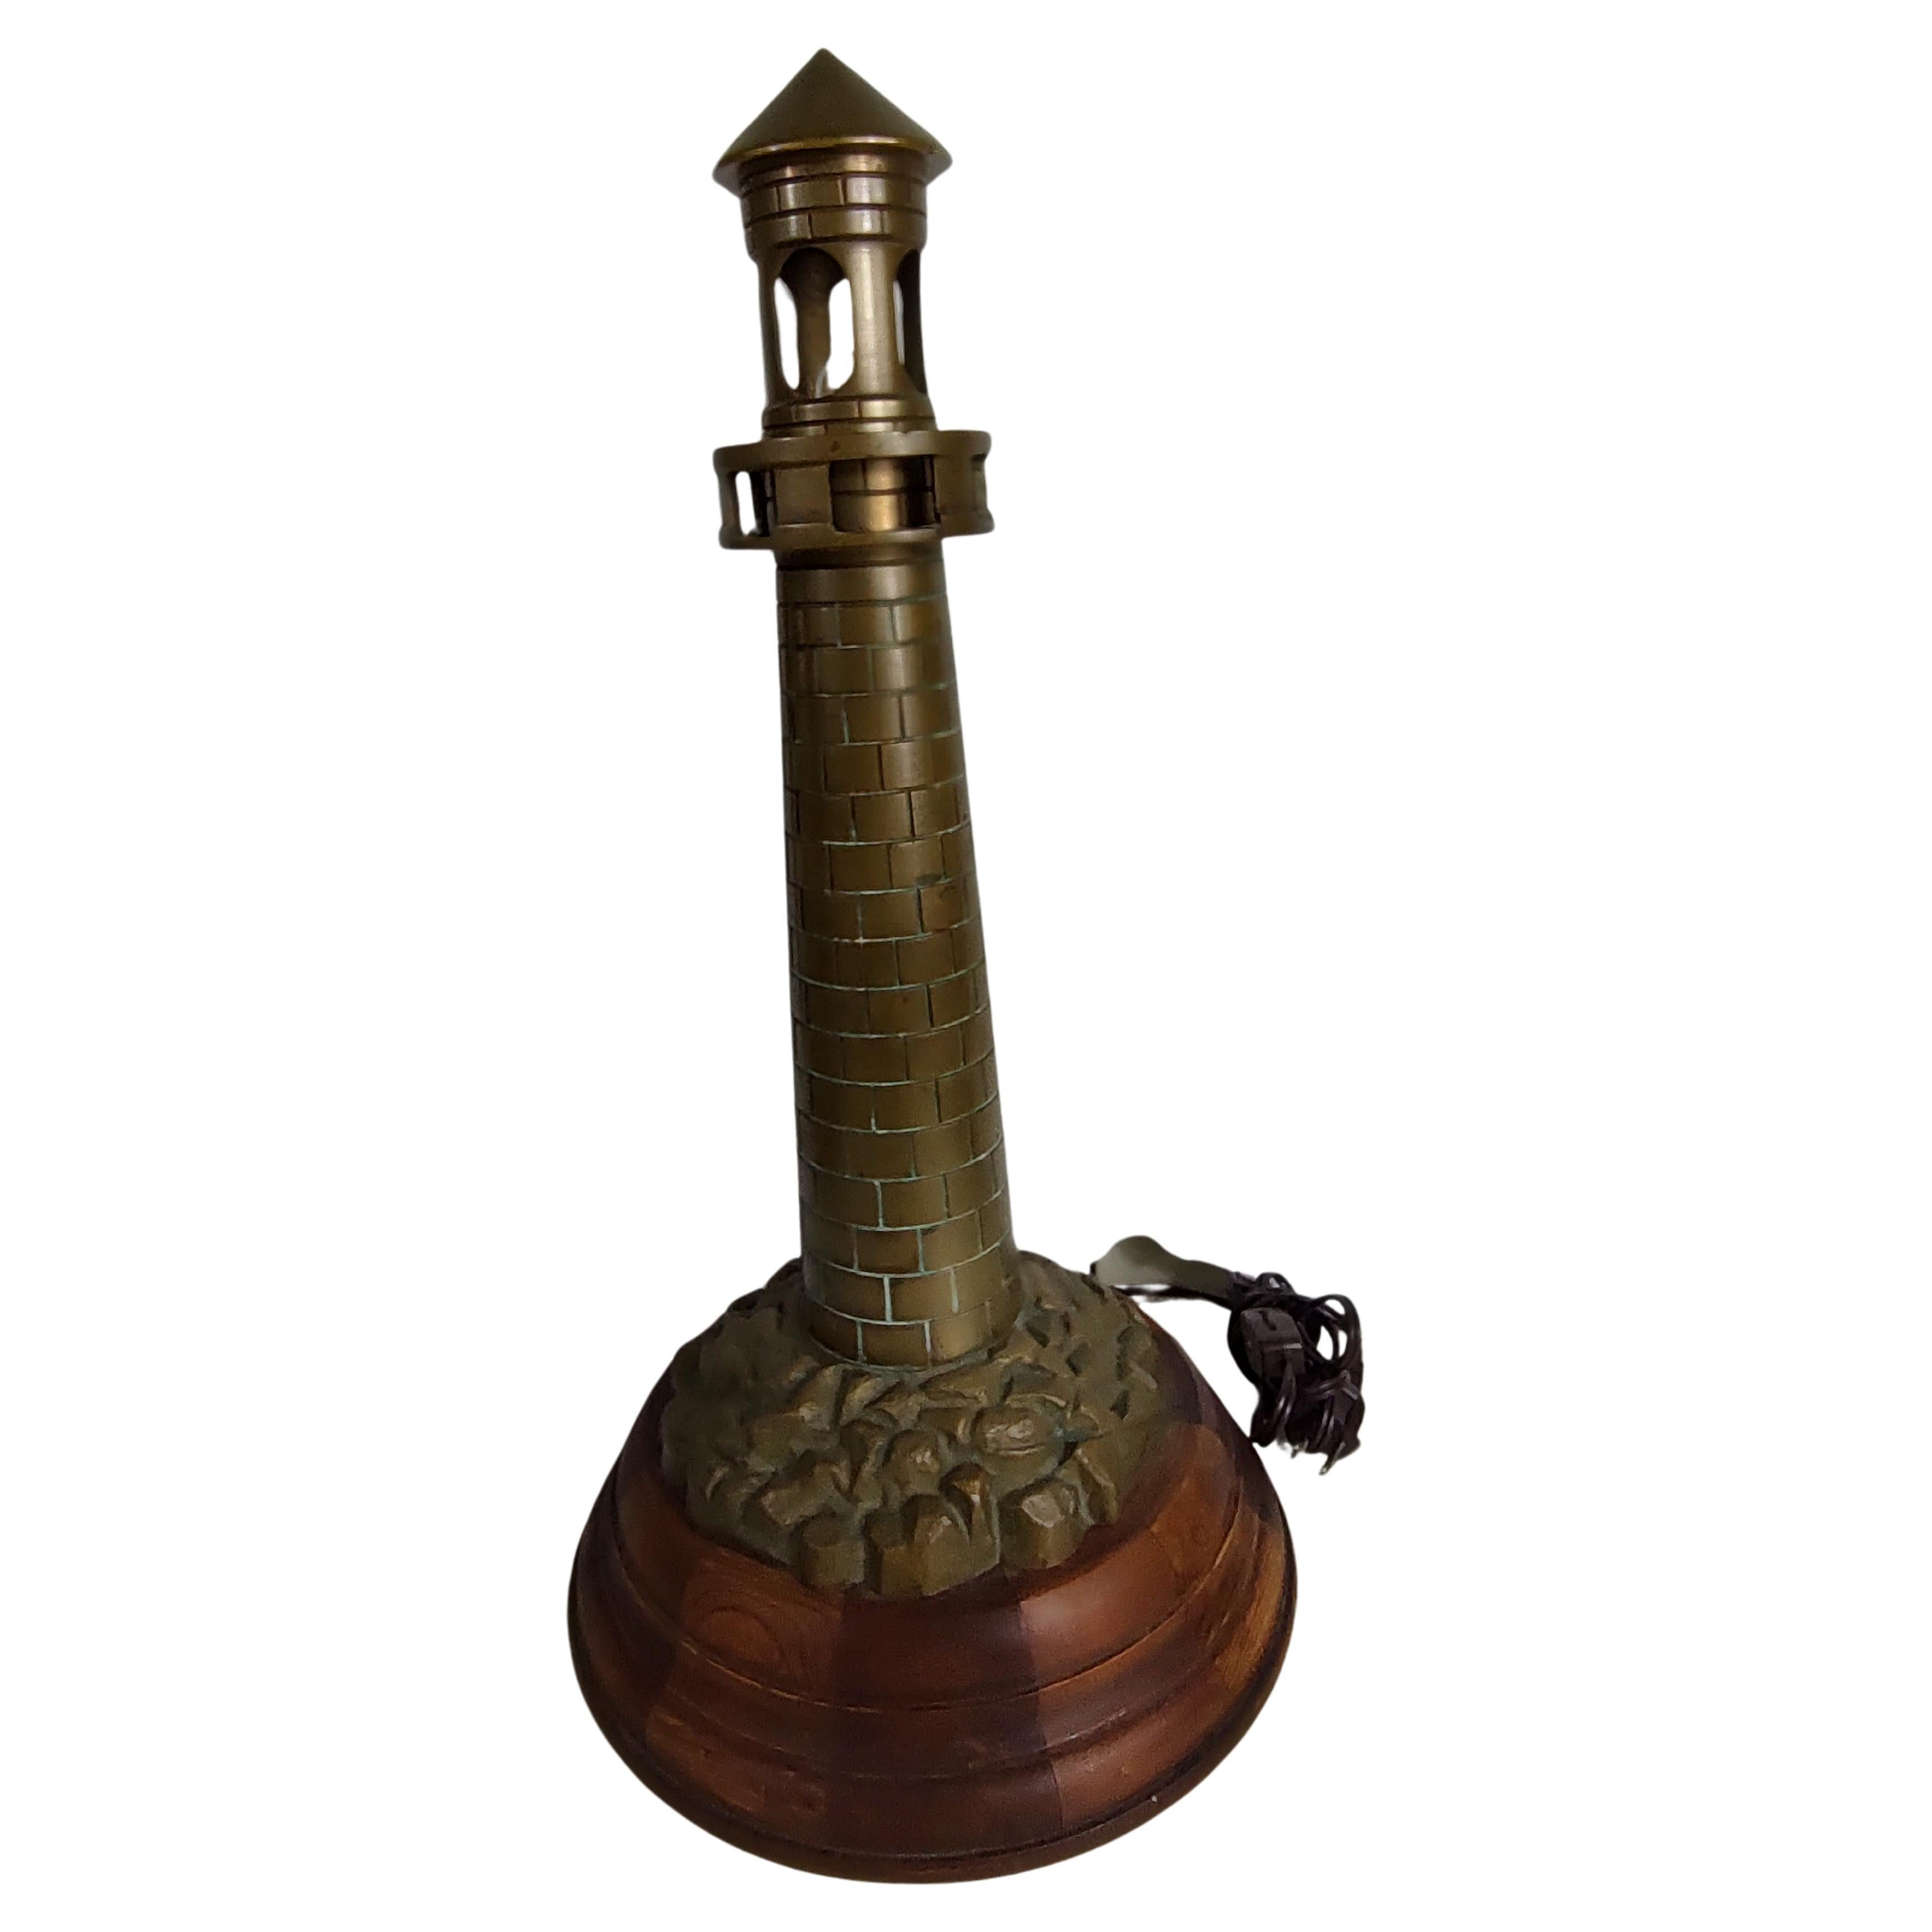 Fabulous cast bronze tall lighthouse in the form of a lamp. Cast rocks at the base which sits above a hand turned stepped wooden base. In excellent vintage condition with minimal wear.